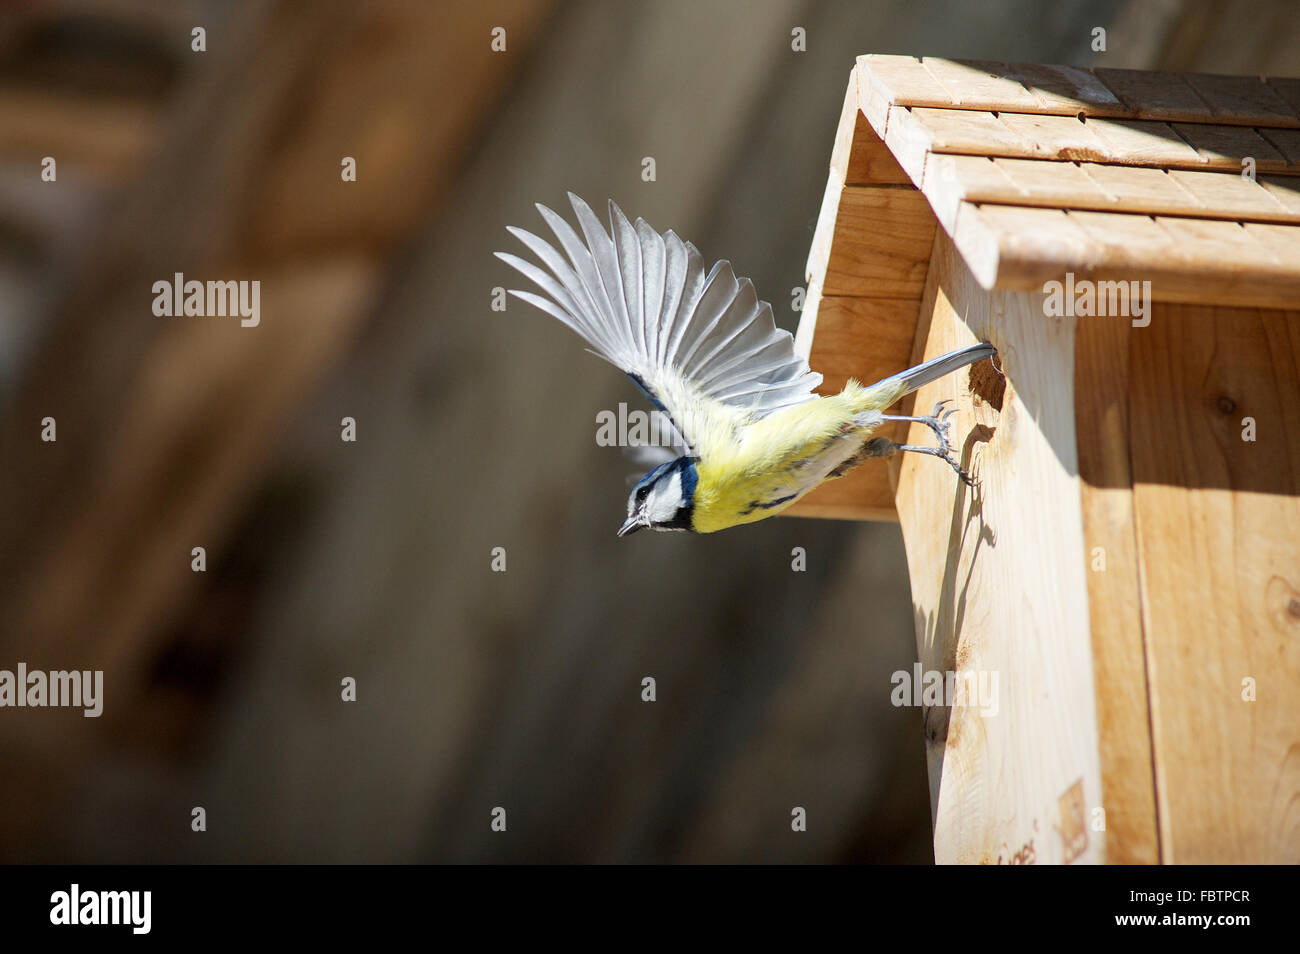 Blue tit (Cyanistes caeruleus) flying away from wooden birdhouse Stock Photo